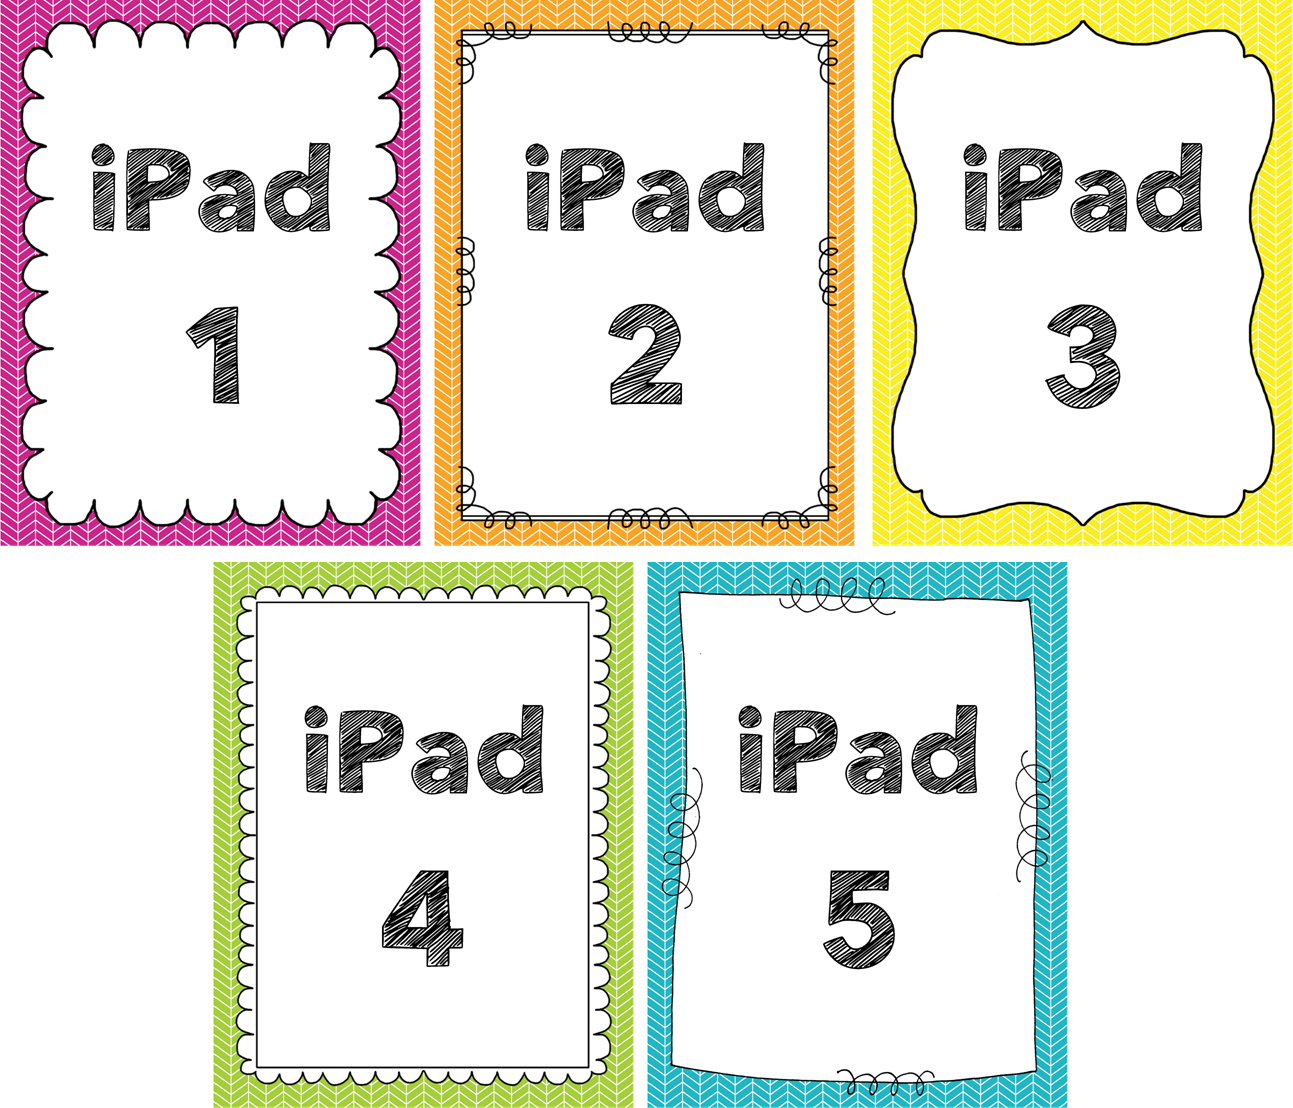 image of 5 example background screens numbered 1 through 5. 